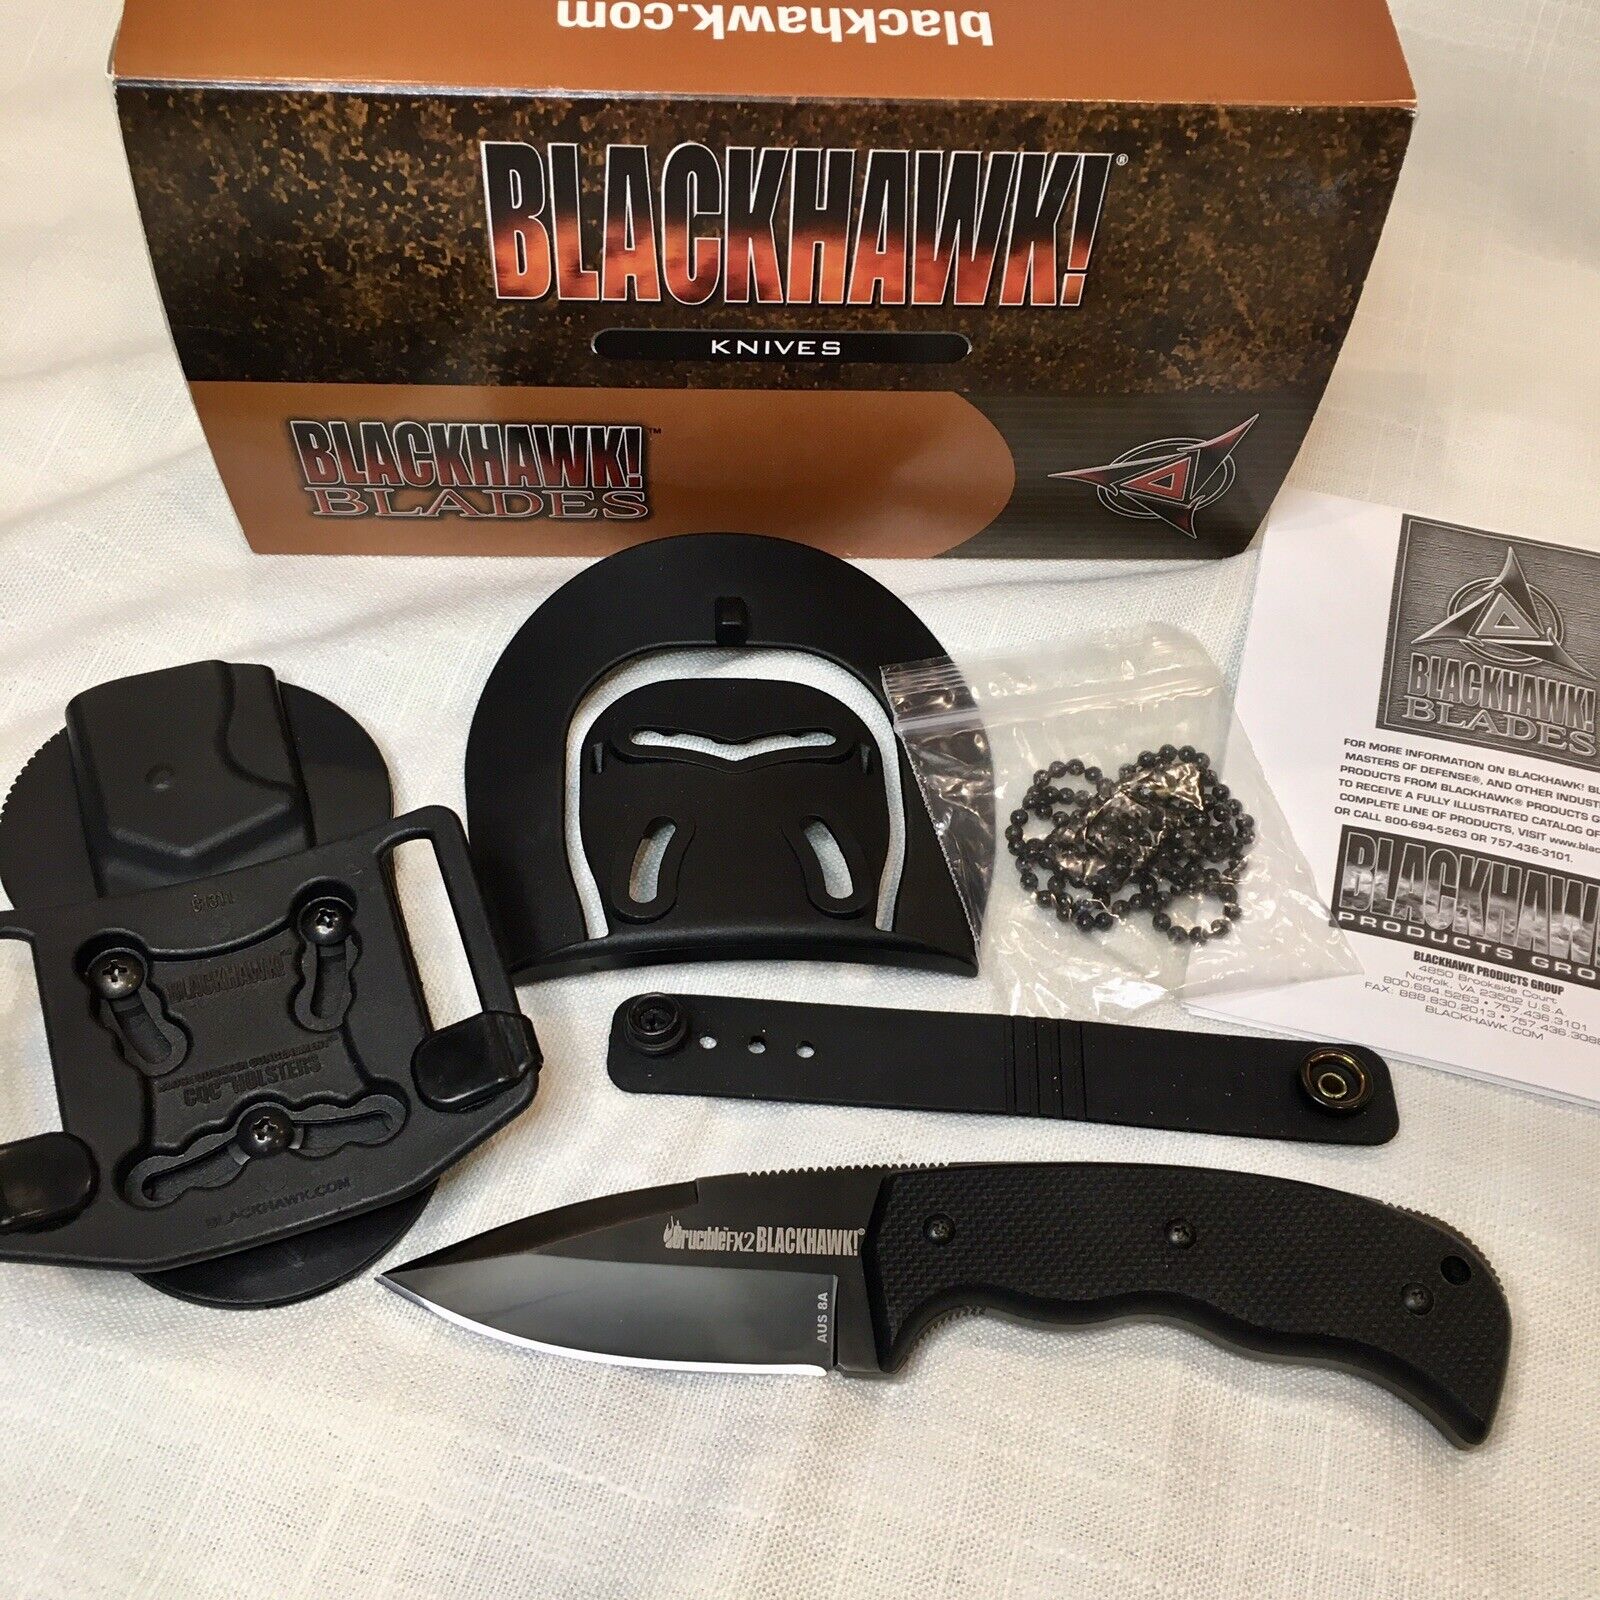 BlackHawk Blades Crucible FX2 Fixed Blade Tactical Concealed Knife & Sheath READ